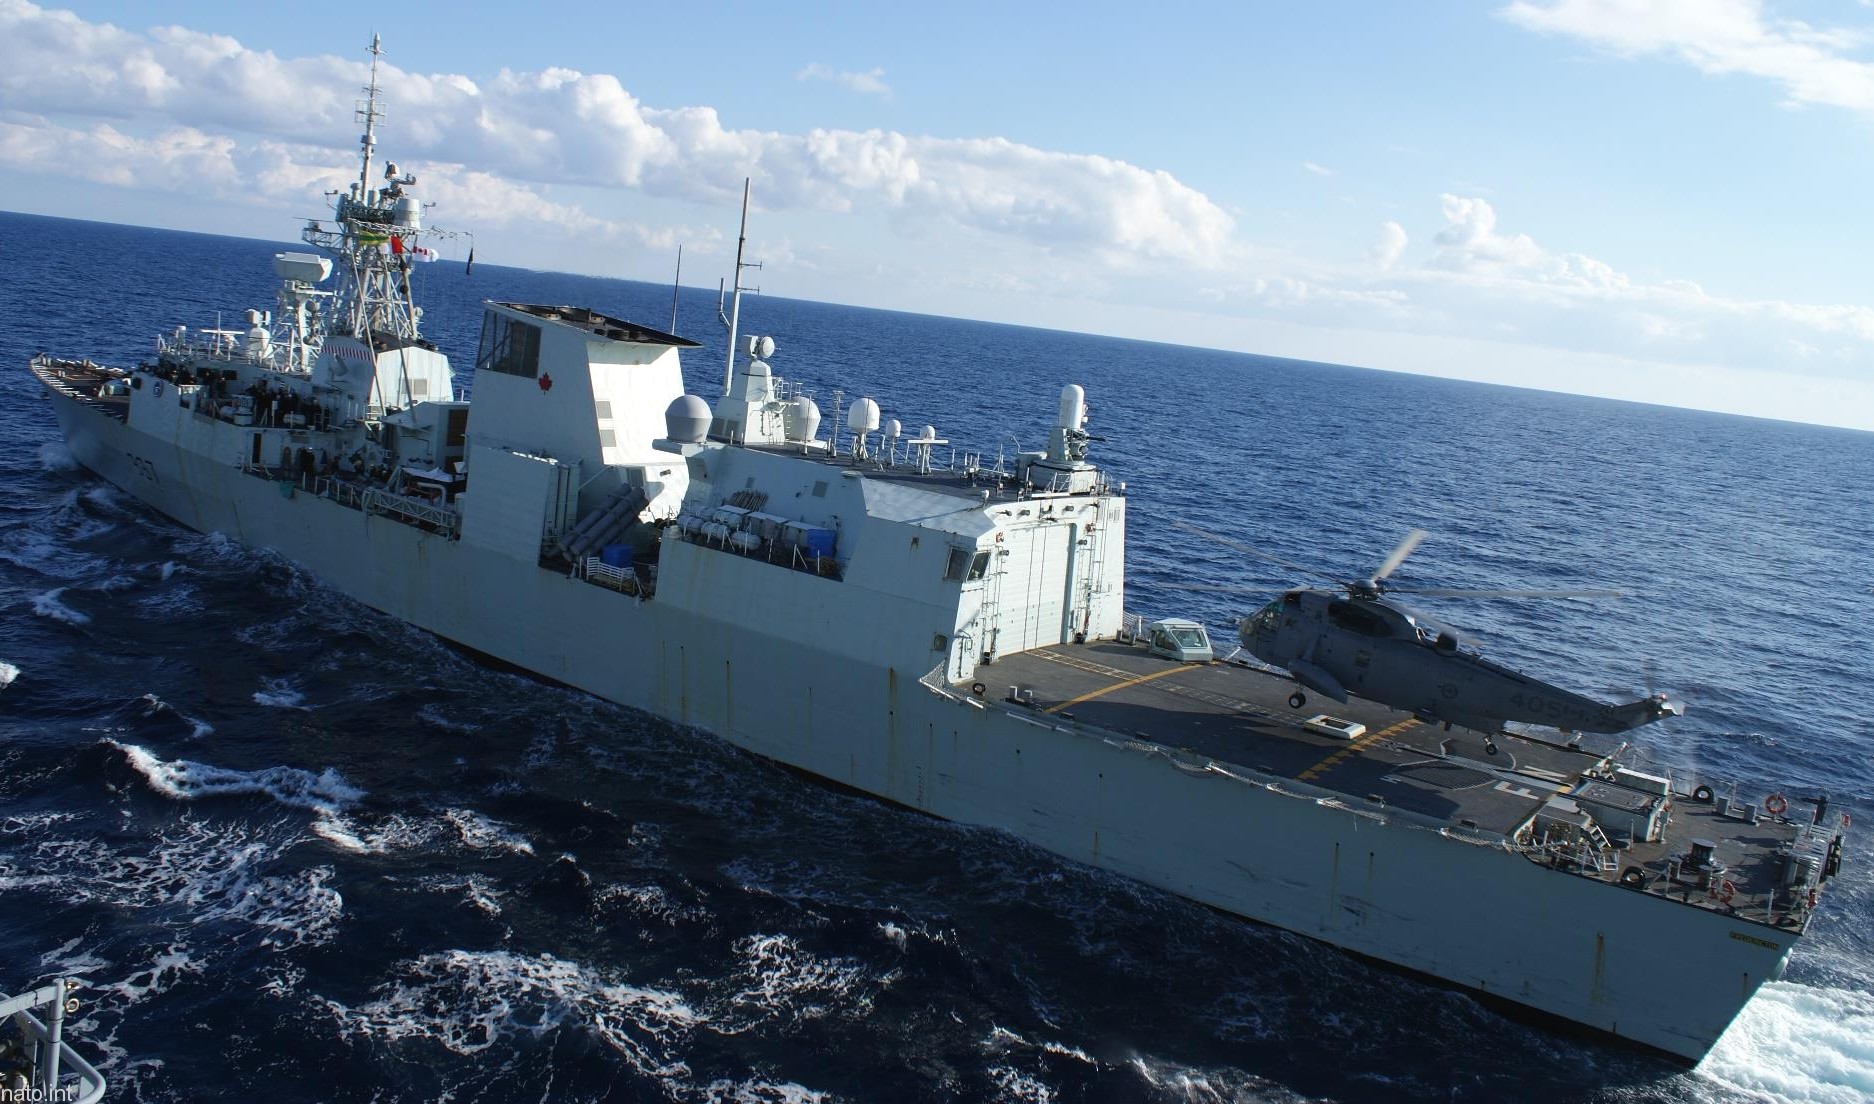 ffh-337 hmcs fredericton halifax class helicopter patrol frigate ncsm royal canadian navy 03